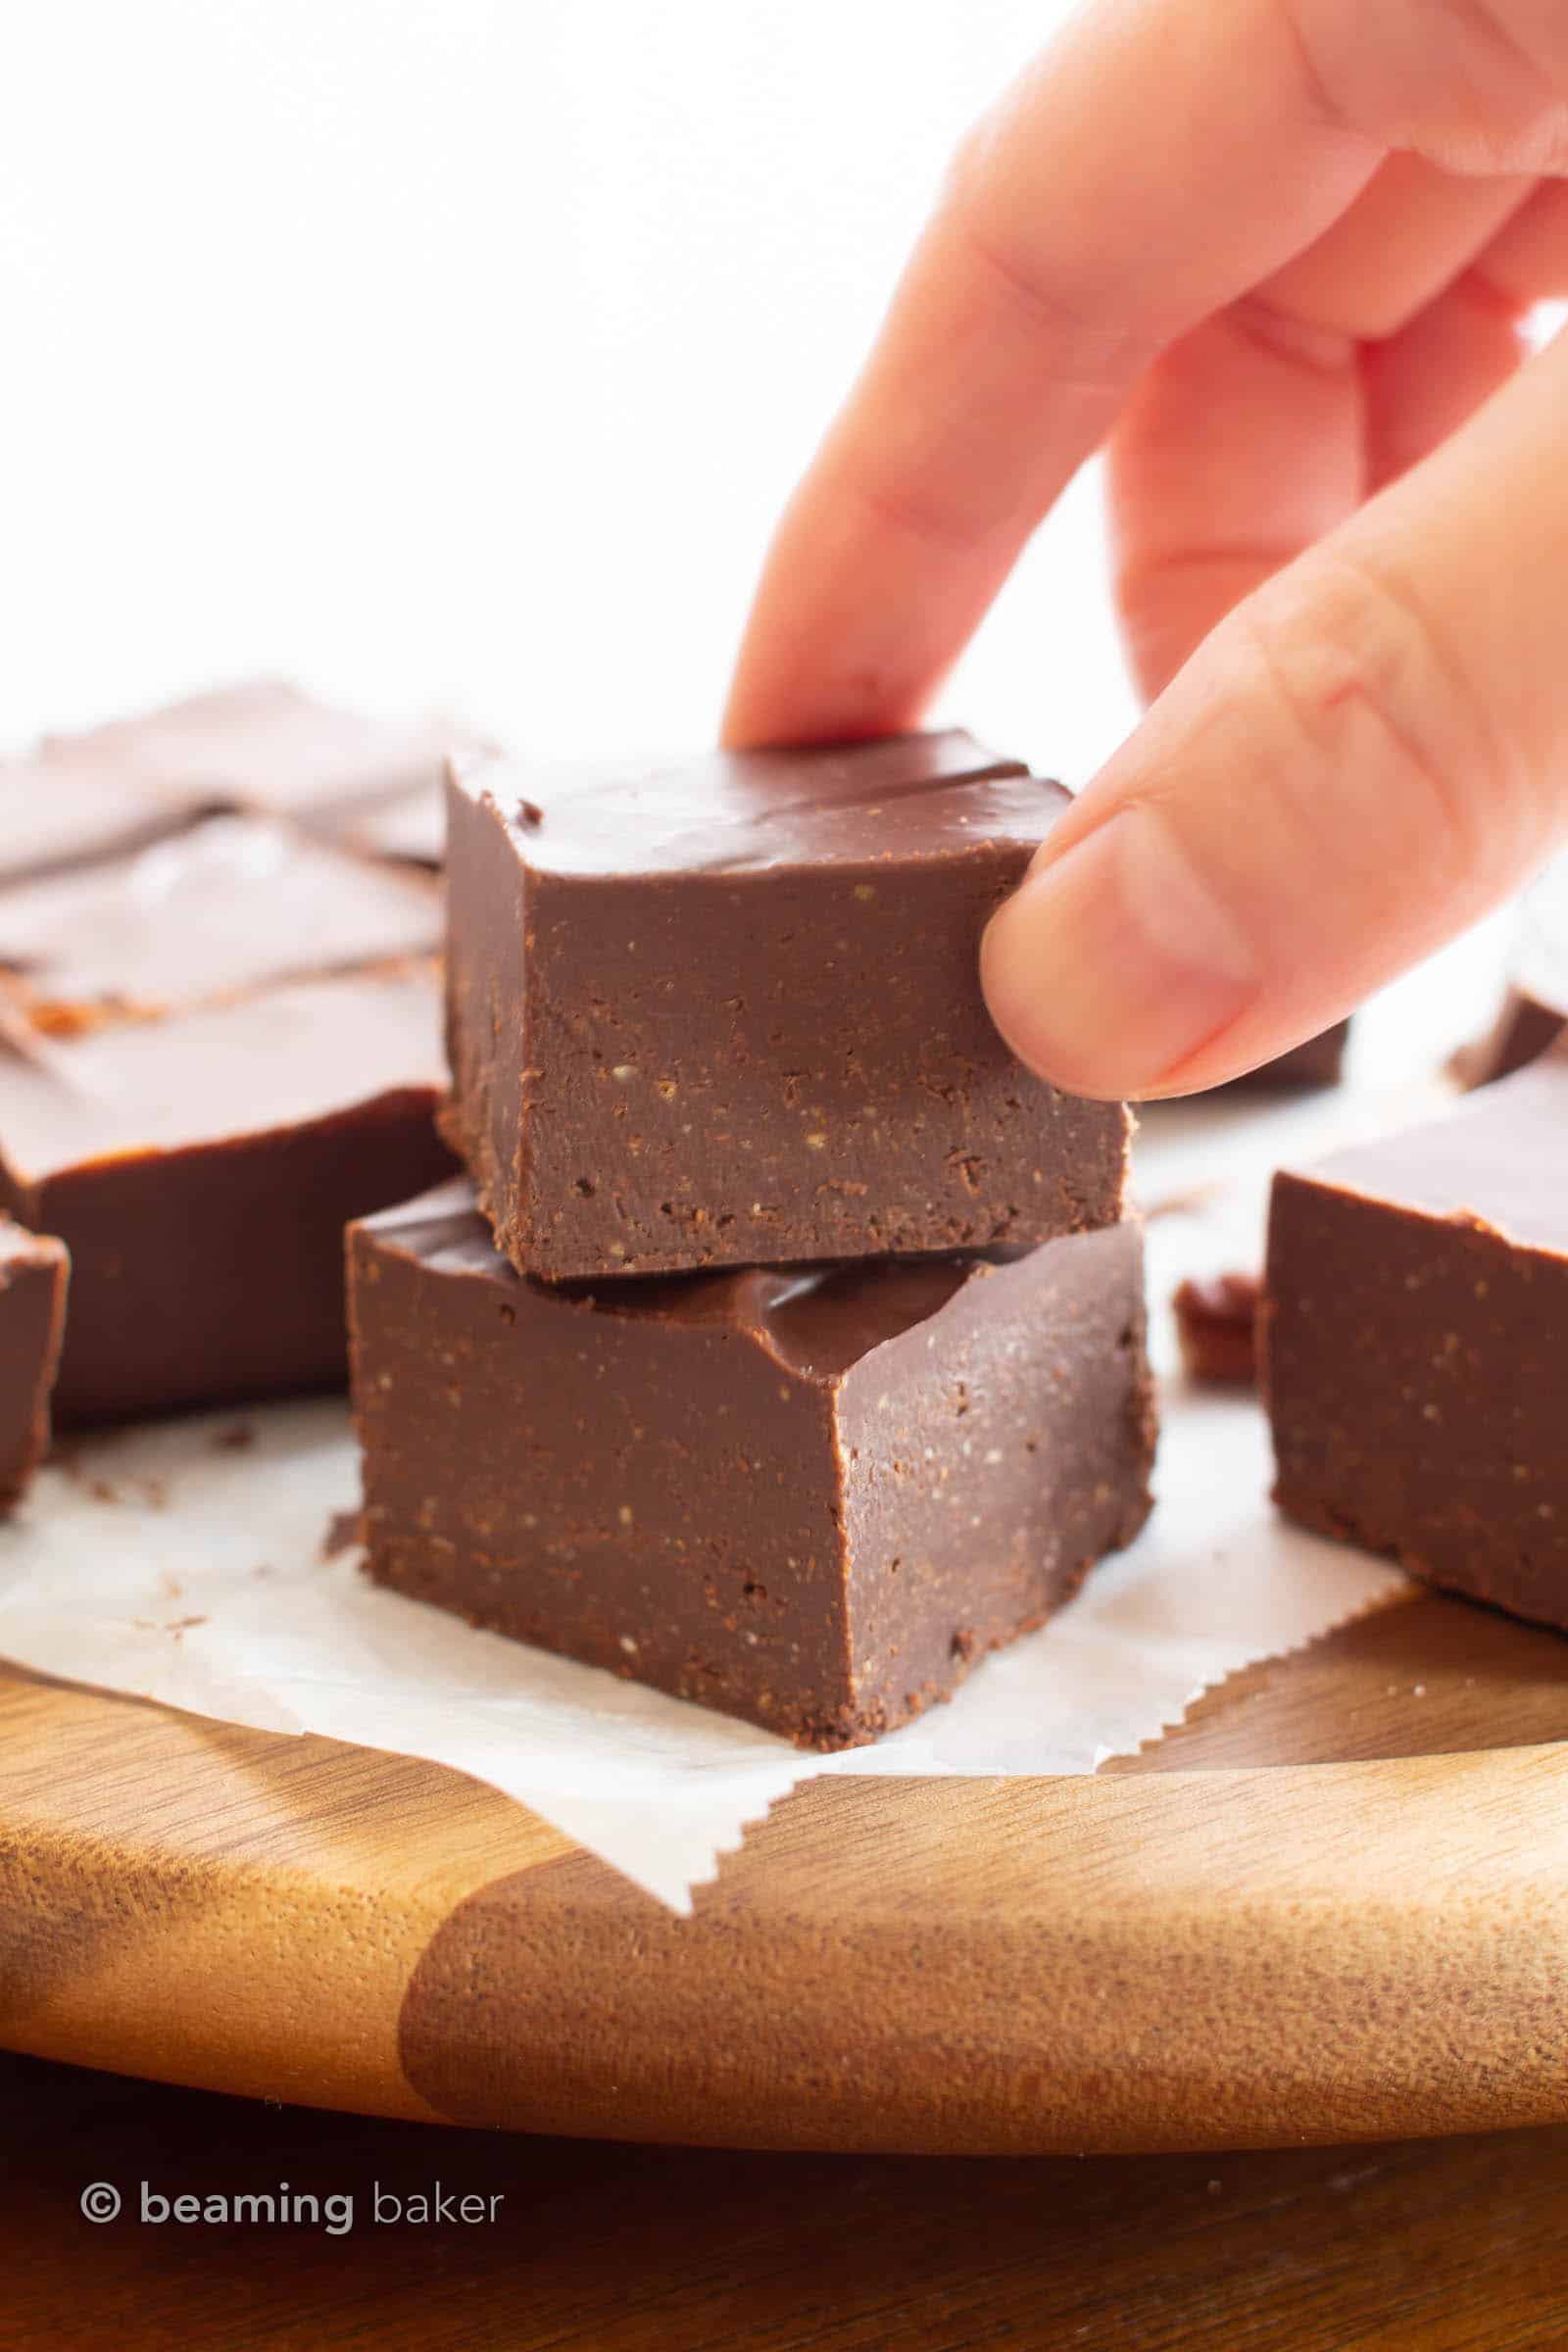 Keto Fudge: this easy keto fudge recipe calls for just 2 simple ingredients and only 5 mins of prep. Creamy, chocolate-y fudge that’s low carb! #Keto #Fudge #LowCarb #Ketogenic | Recipe at BeamingBaker.com